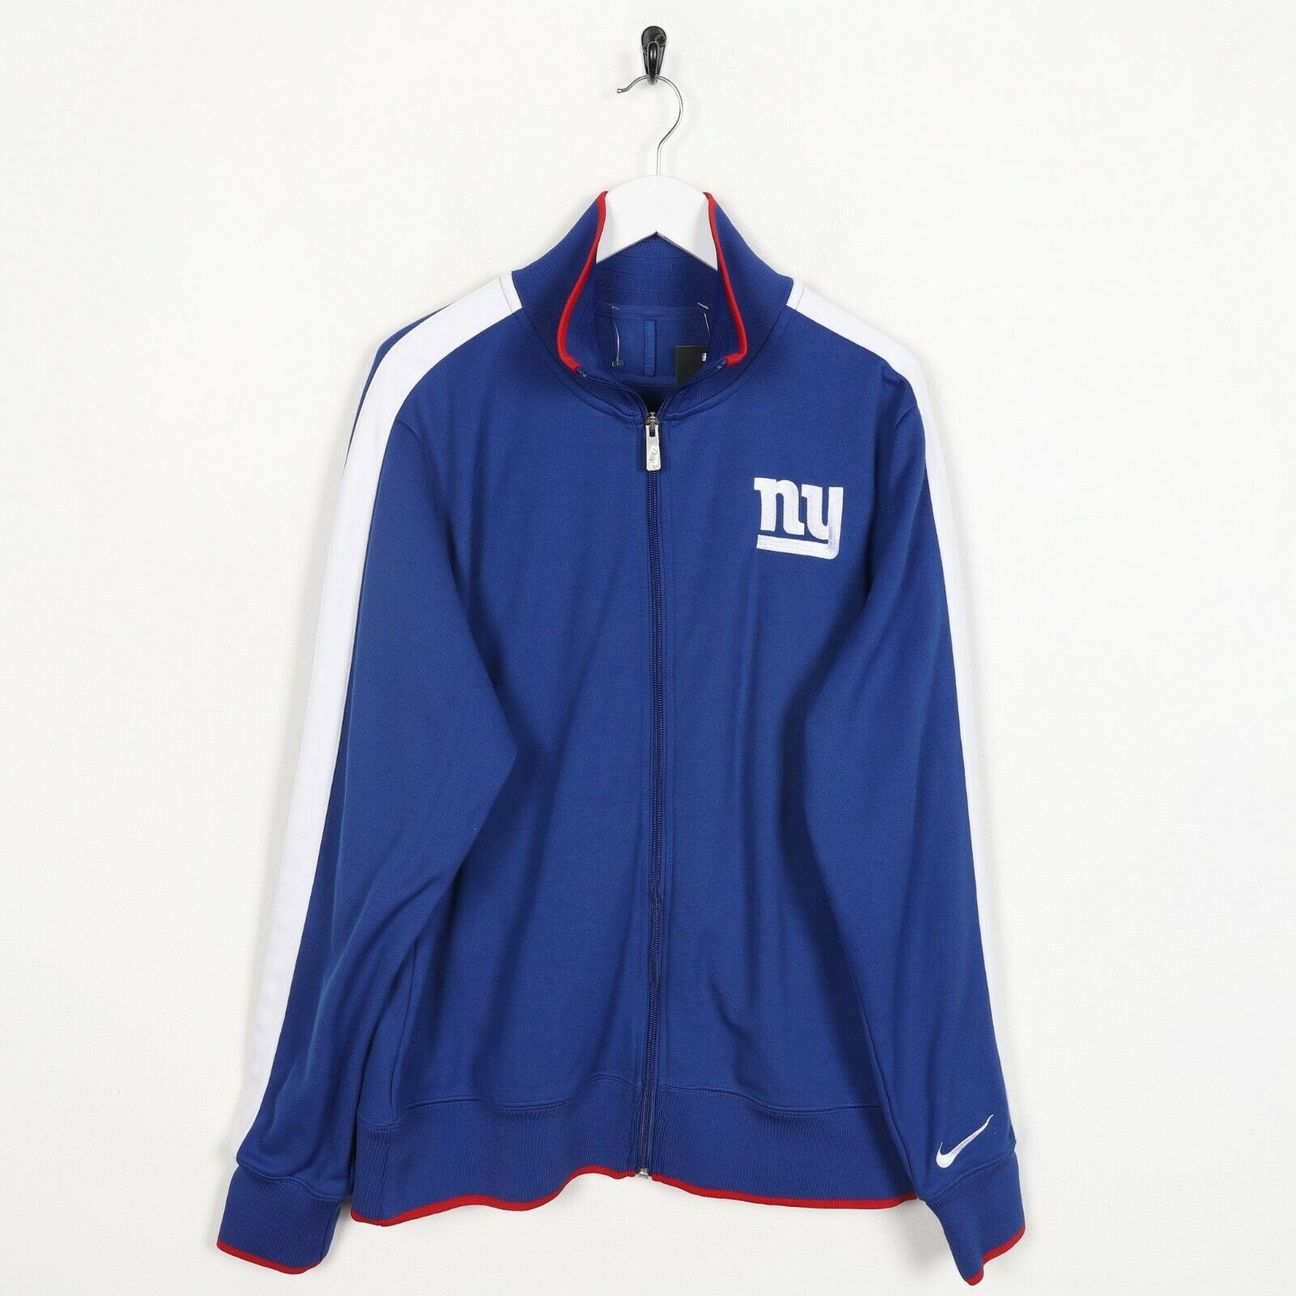 Nike NFL New York Giants Tracksuit Top Jacket Blue Large freeshipping - Unique Pieces Vintage